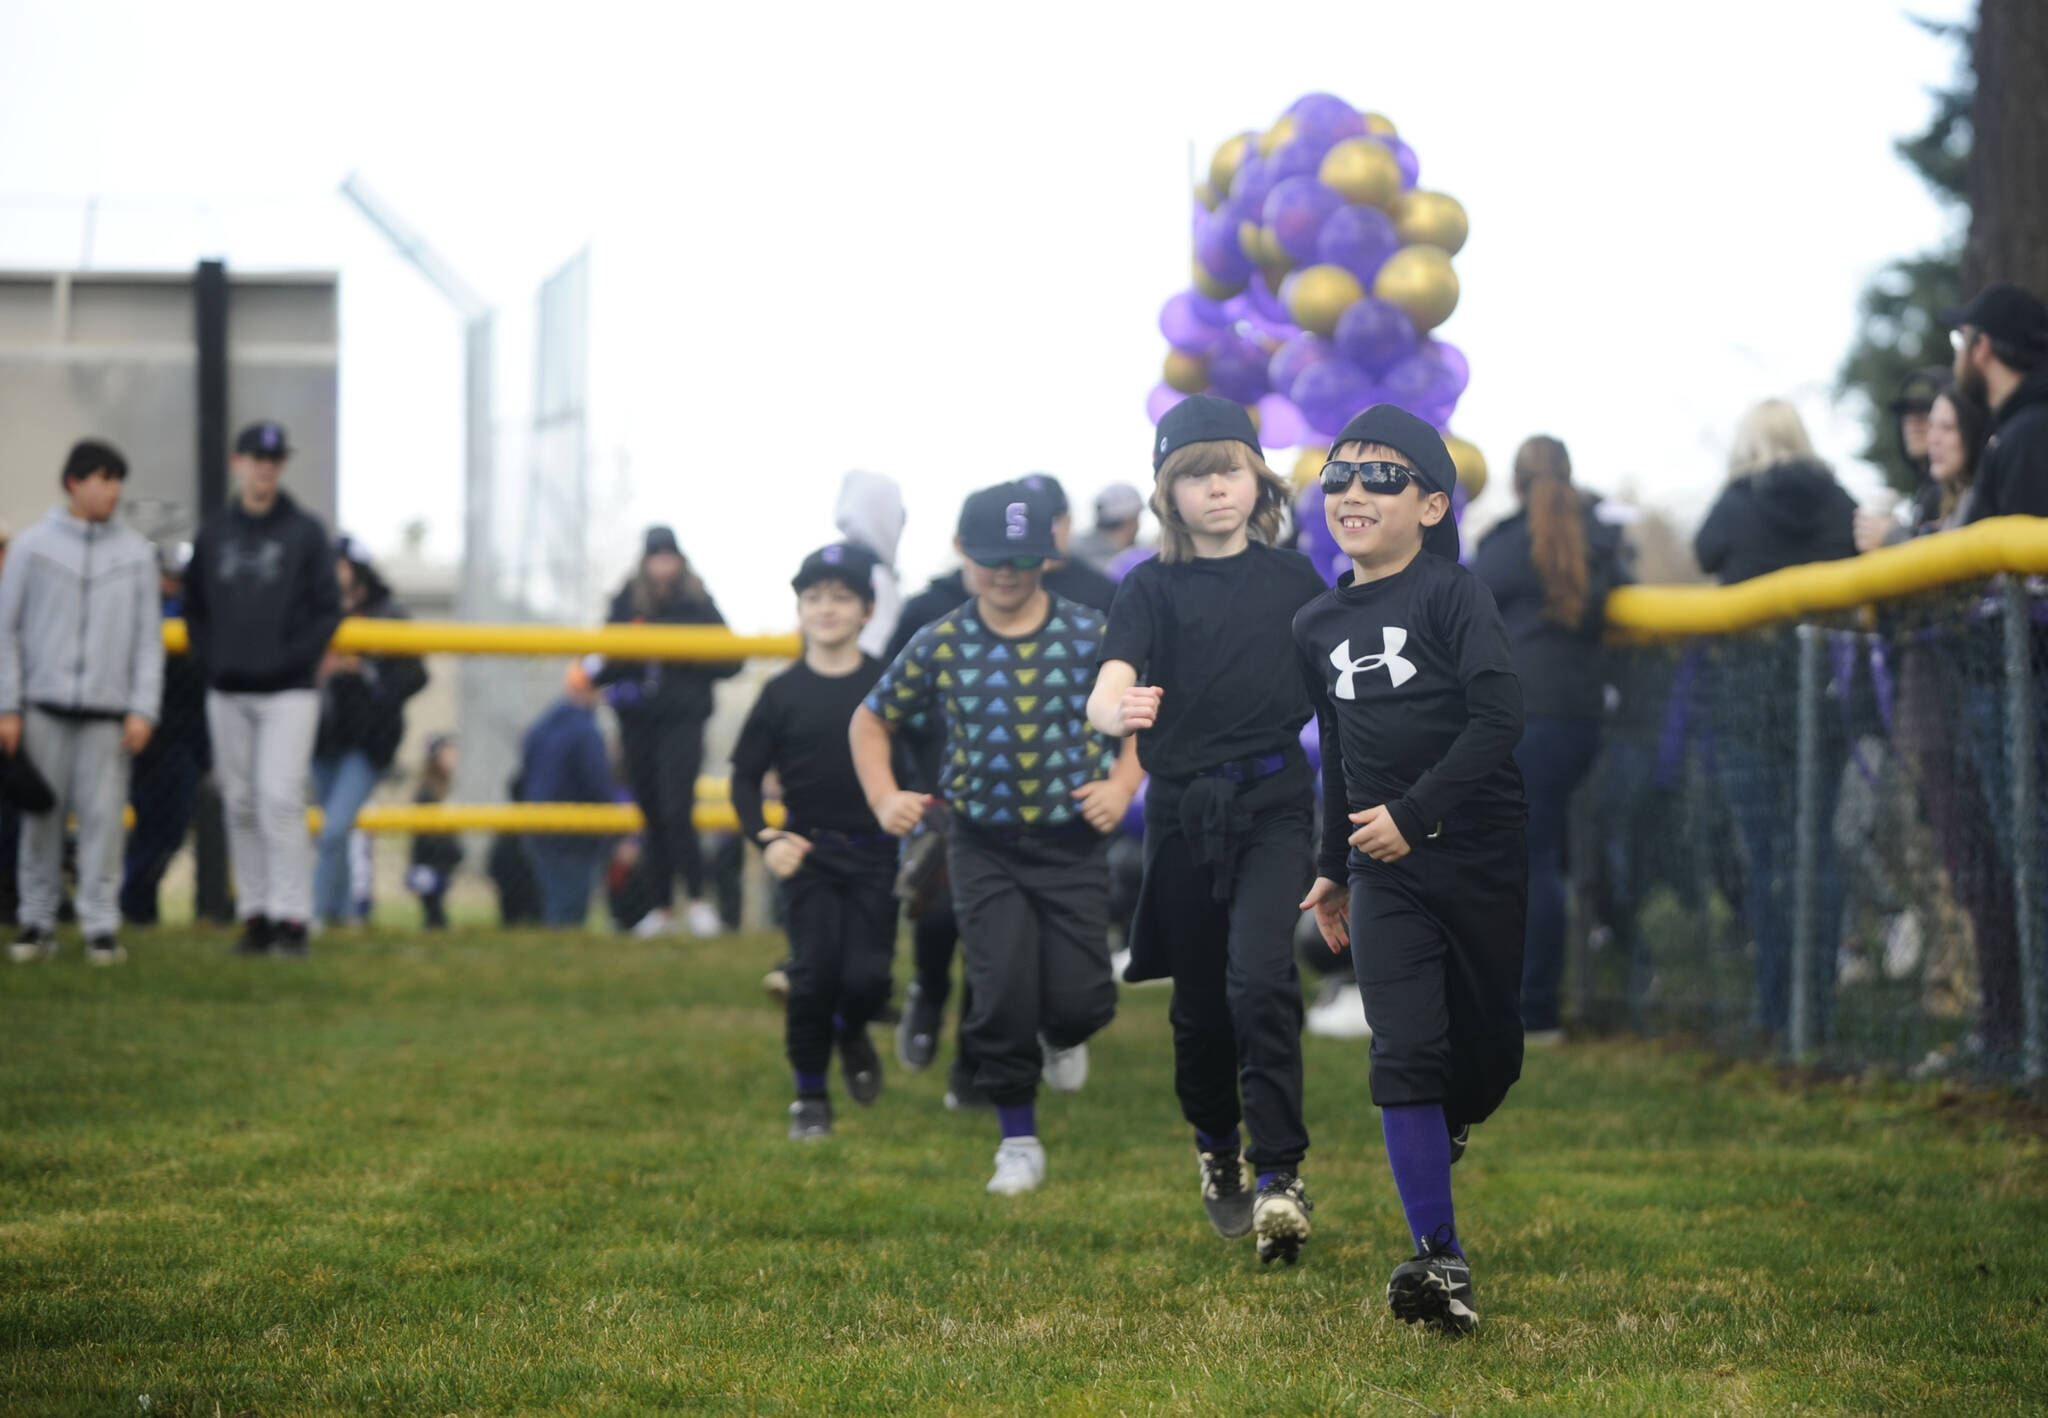 Sequim Gazette photoS by Michael Dashiell
Sequim Little Leaguers (from right) Brayden Smith, Aiden Fazio, Kayden Connelly, and Hudson Holgeson race onto the Don Knapp Field during the league’s parade of teams at the Opening Day ceremonies on April 25.